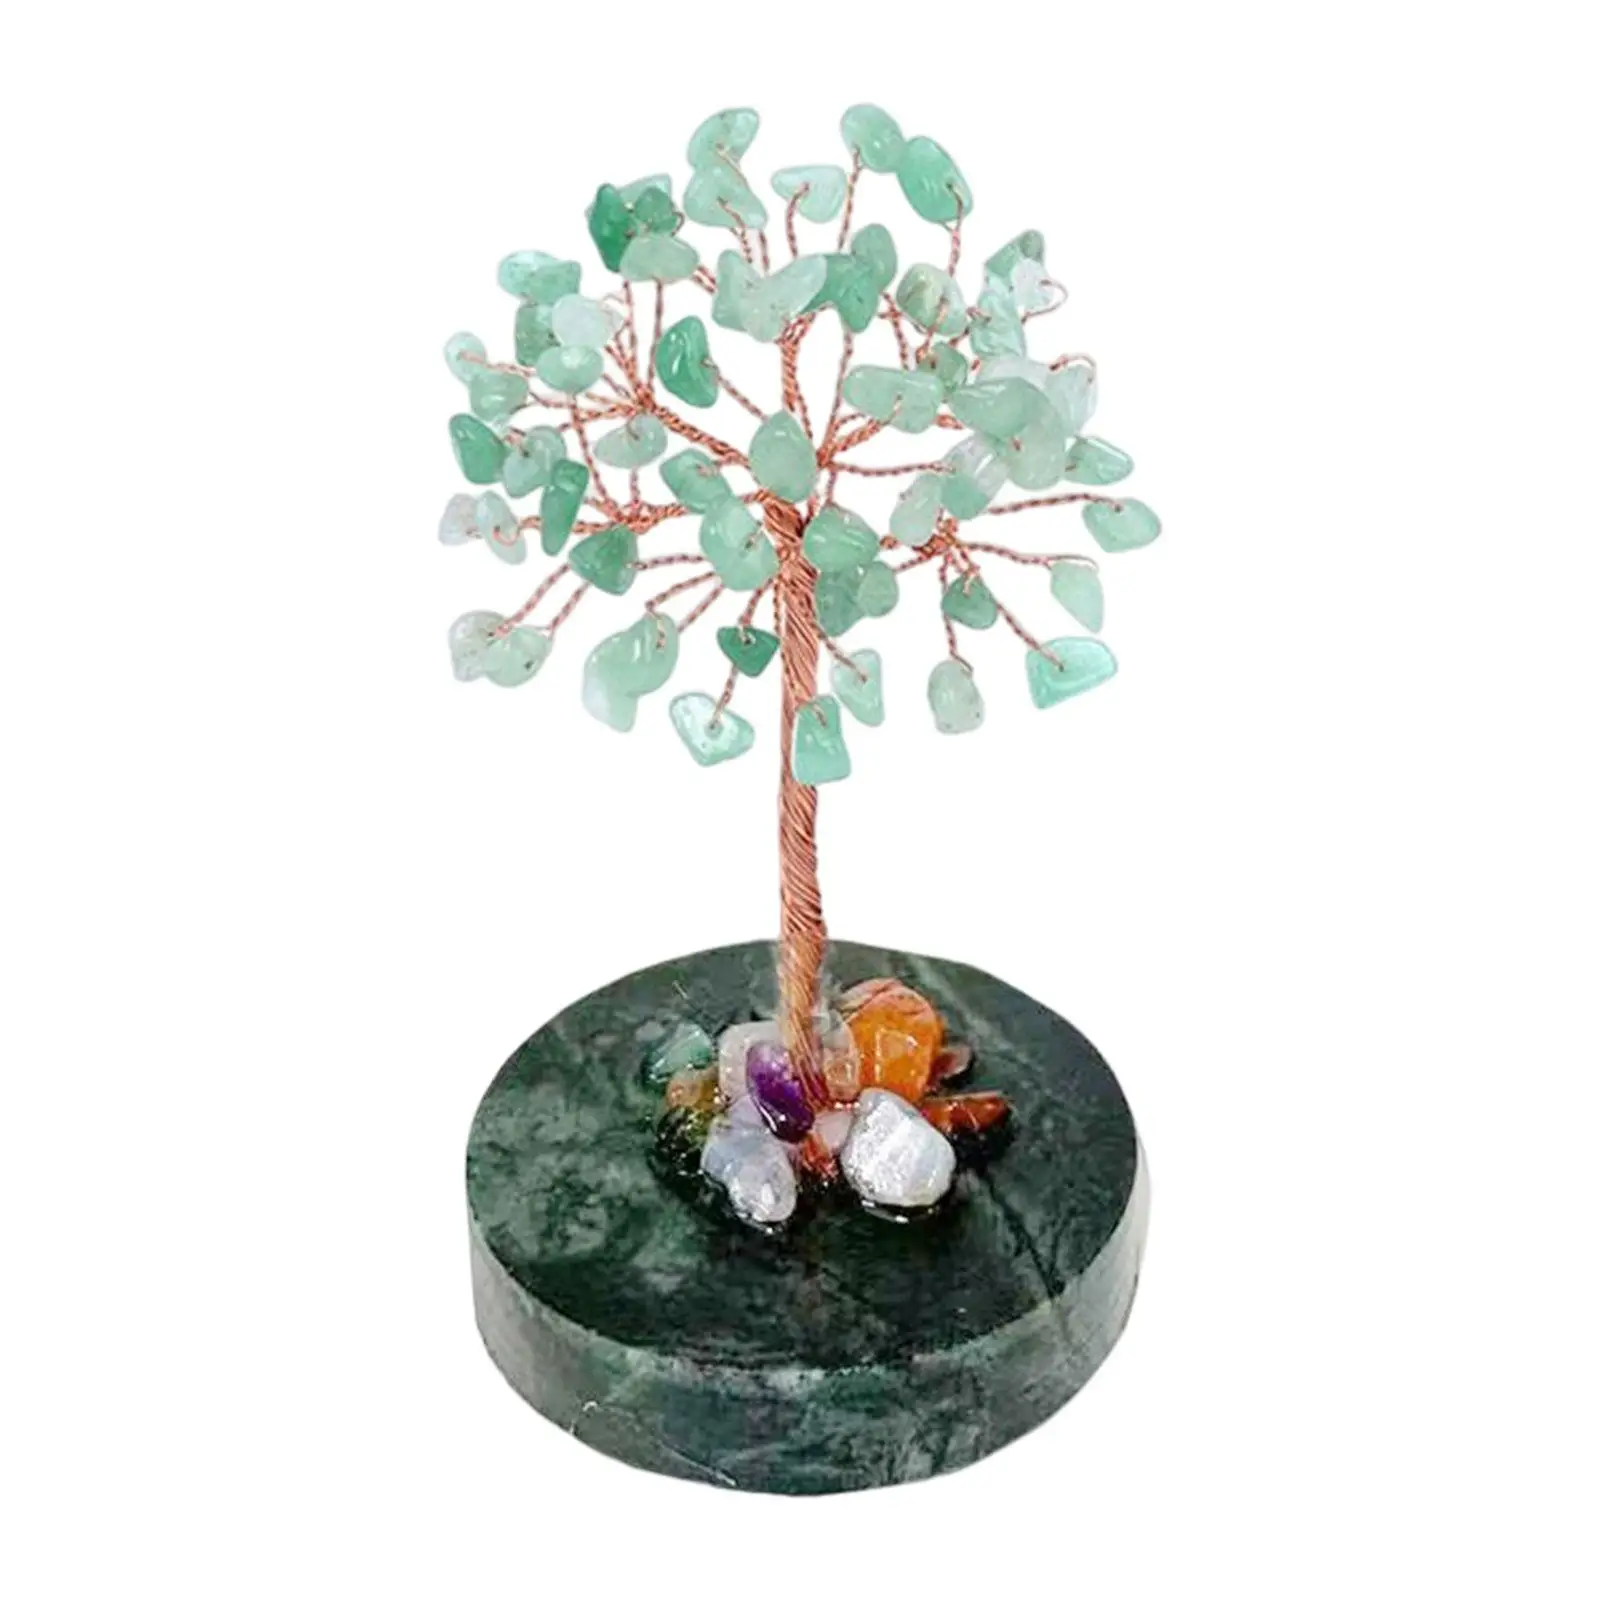 Tree Ornament Accessories Decoration Handmade Sculpture for Birthday Living Room